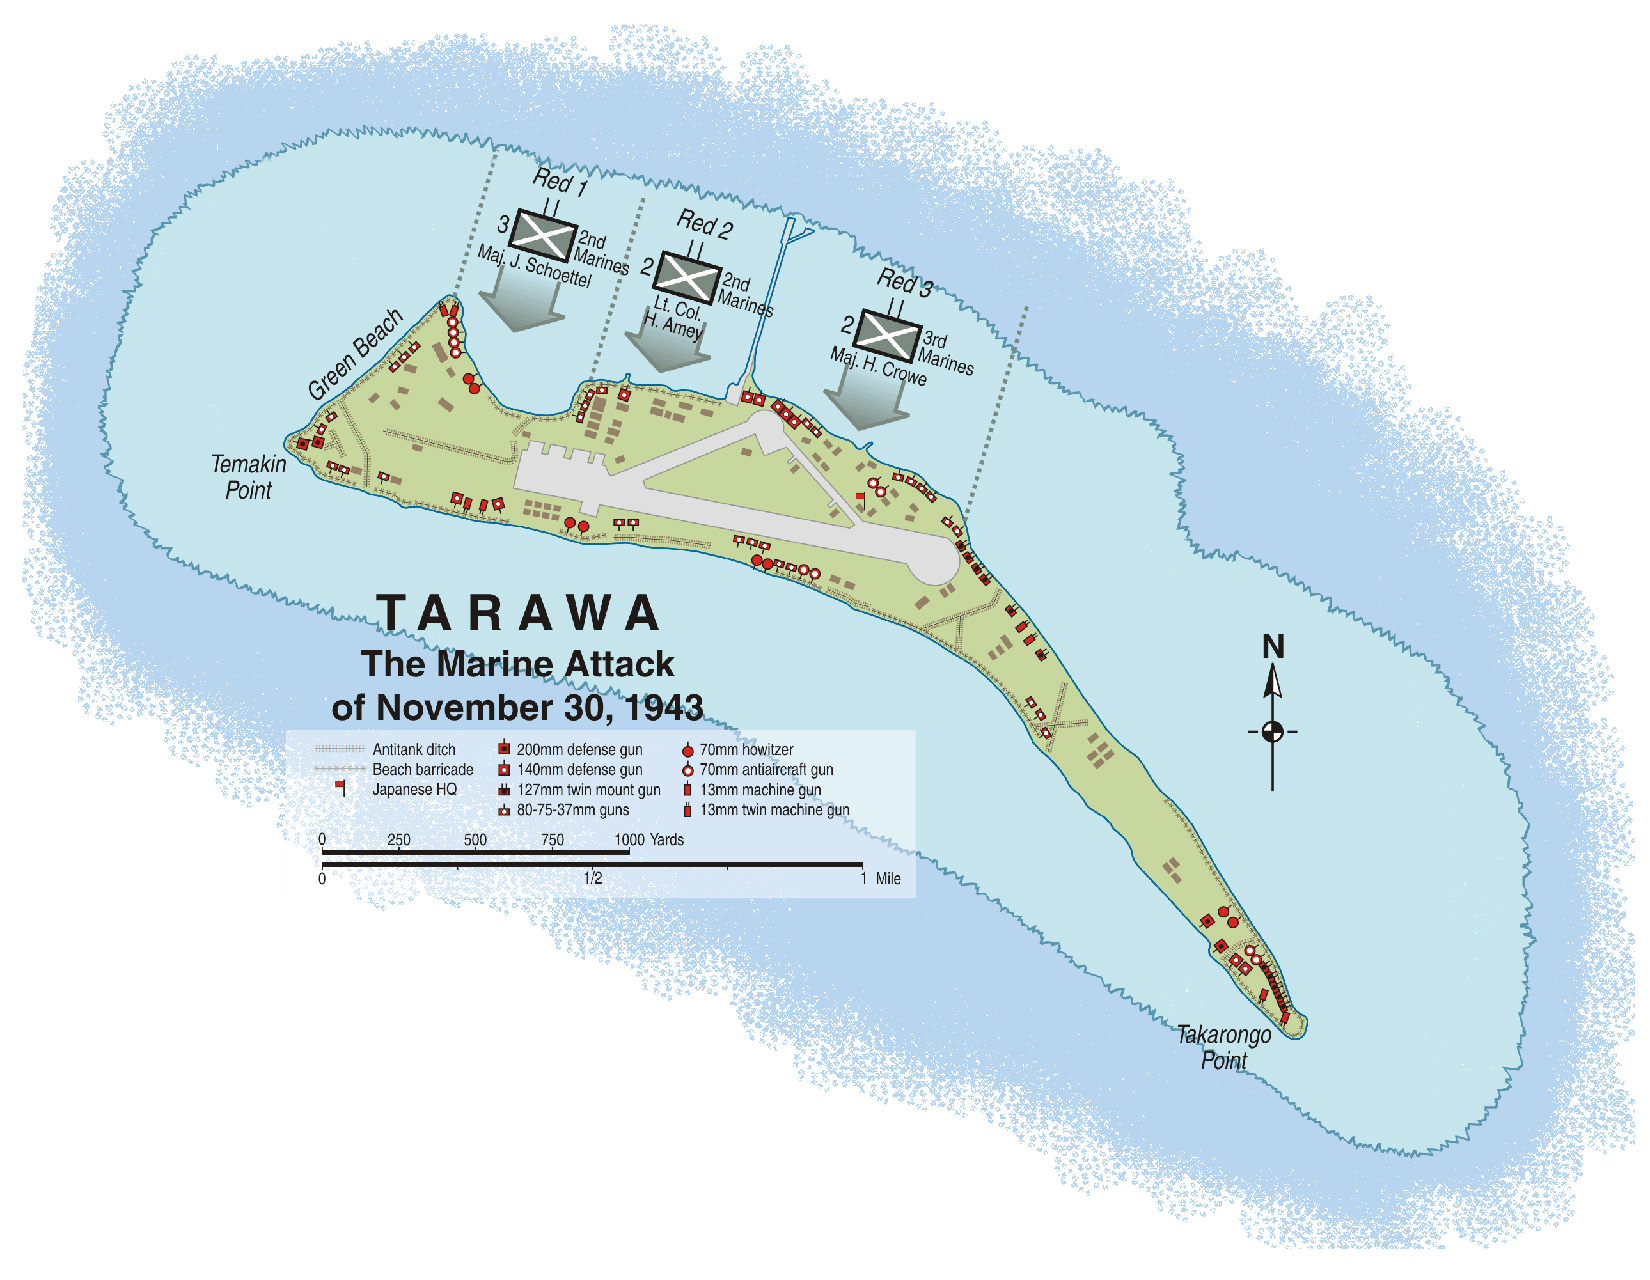 Betio islet, shaped roughly like a parrot, was the scene of horrific fighting as U.S. Marines captured Tarawa atoll. The landing beaches were designated Red 1 through Red 3, running west to east on the reef side of the islet.  Beaches designated Green and Black were considered much less suitable for landing operations.